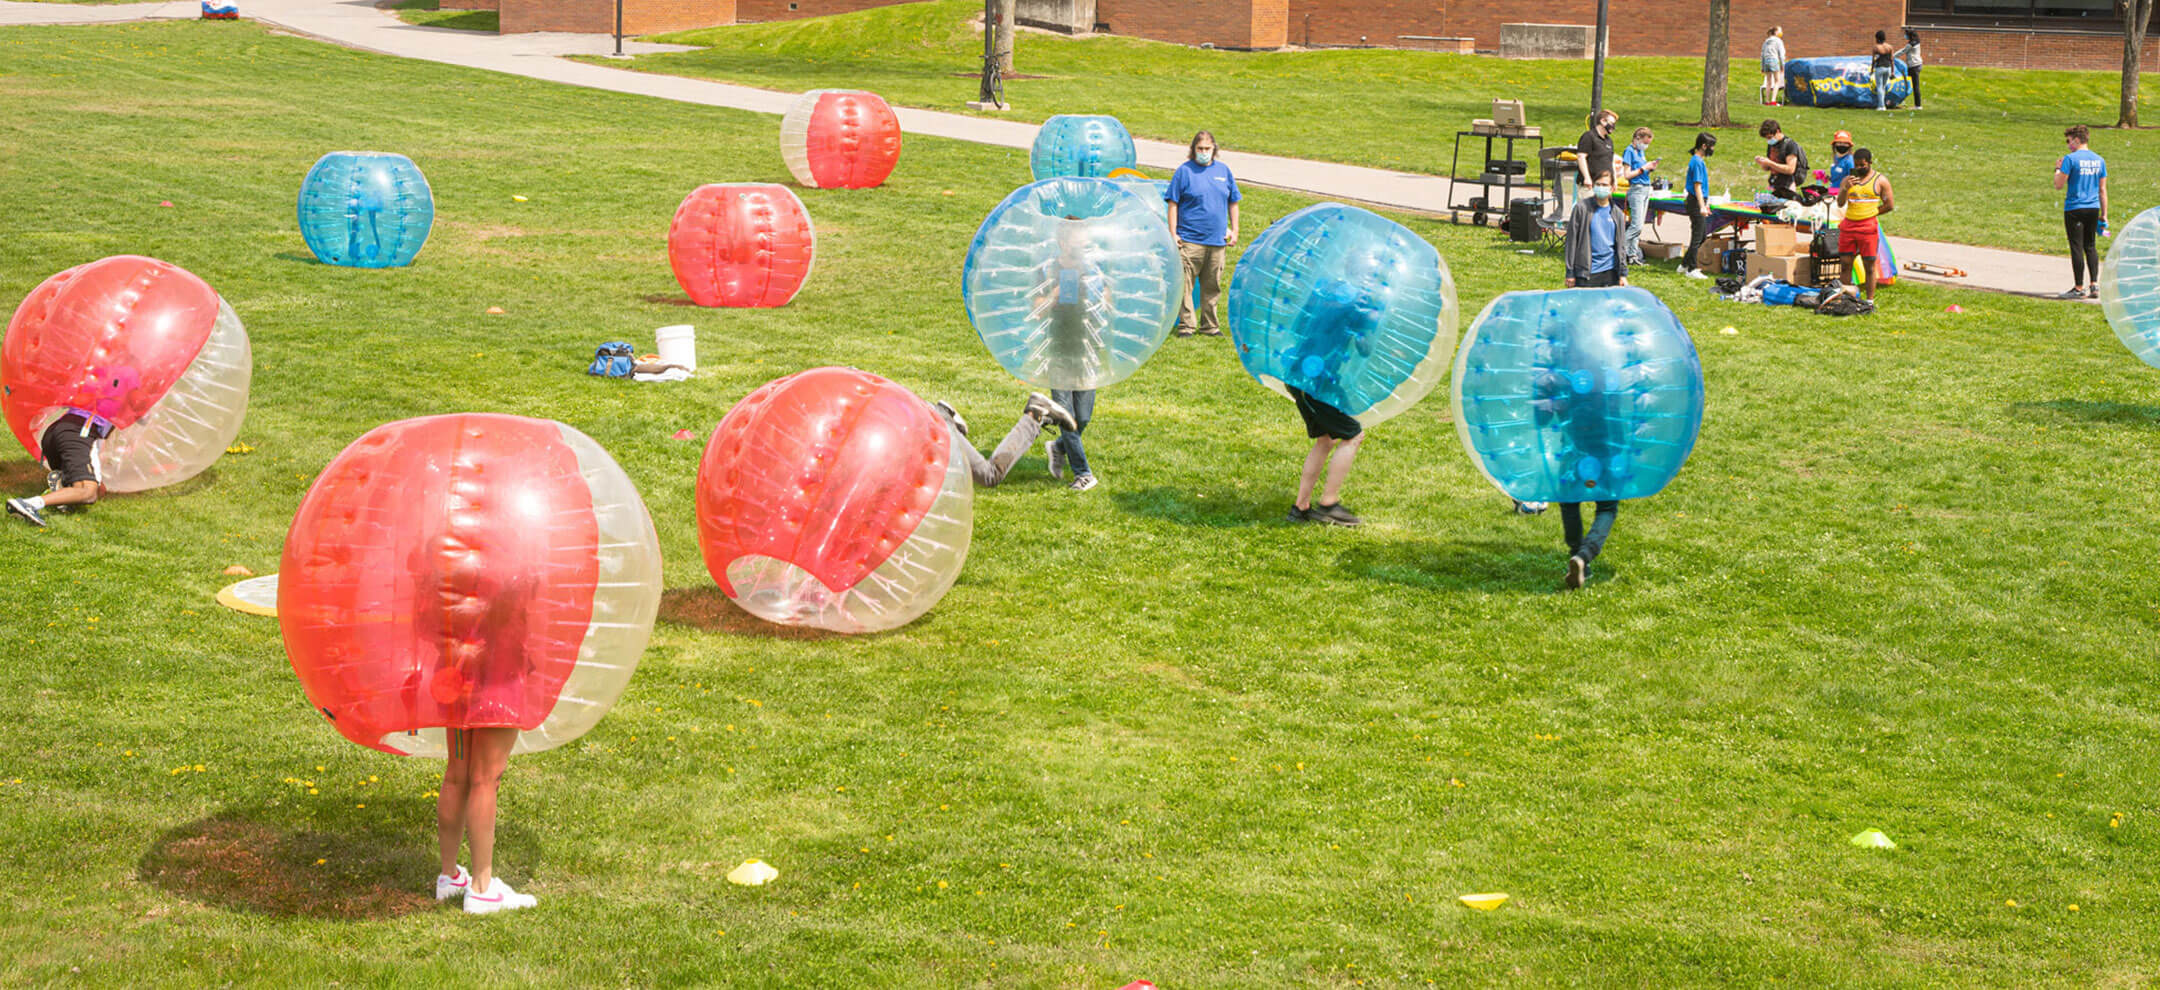 A game of bubble ball being played by students.